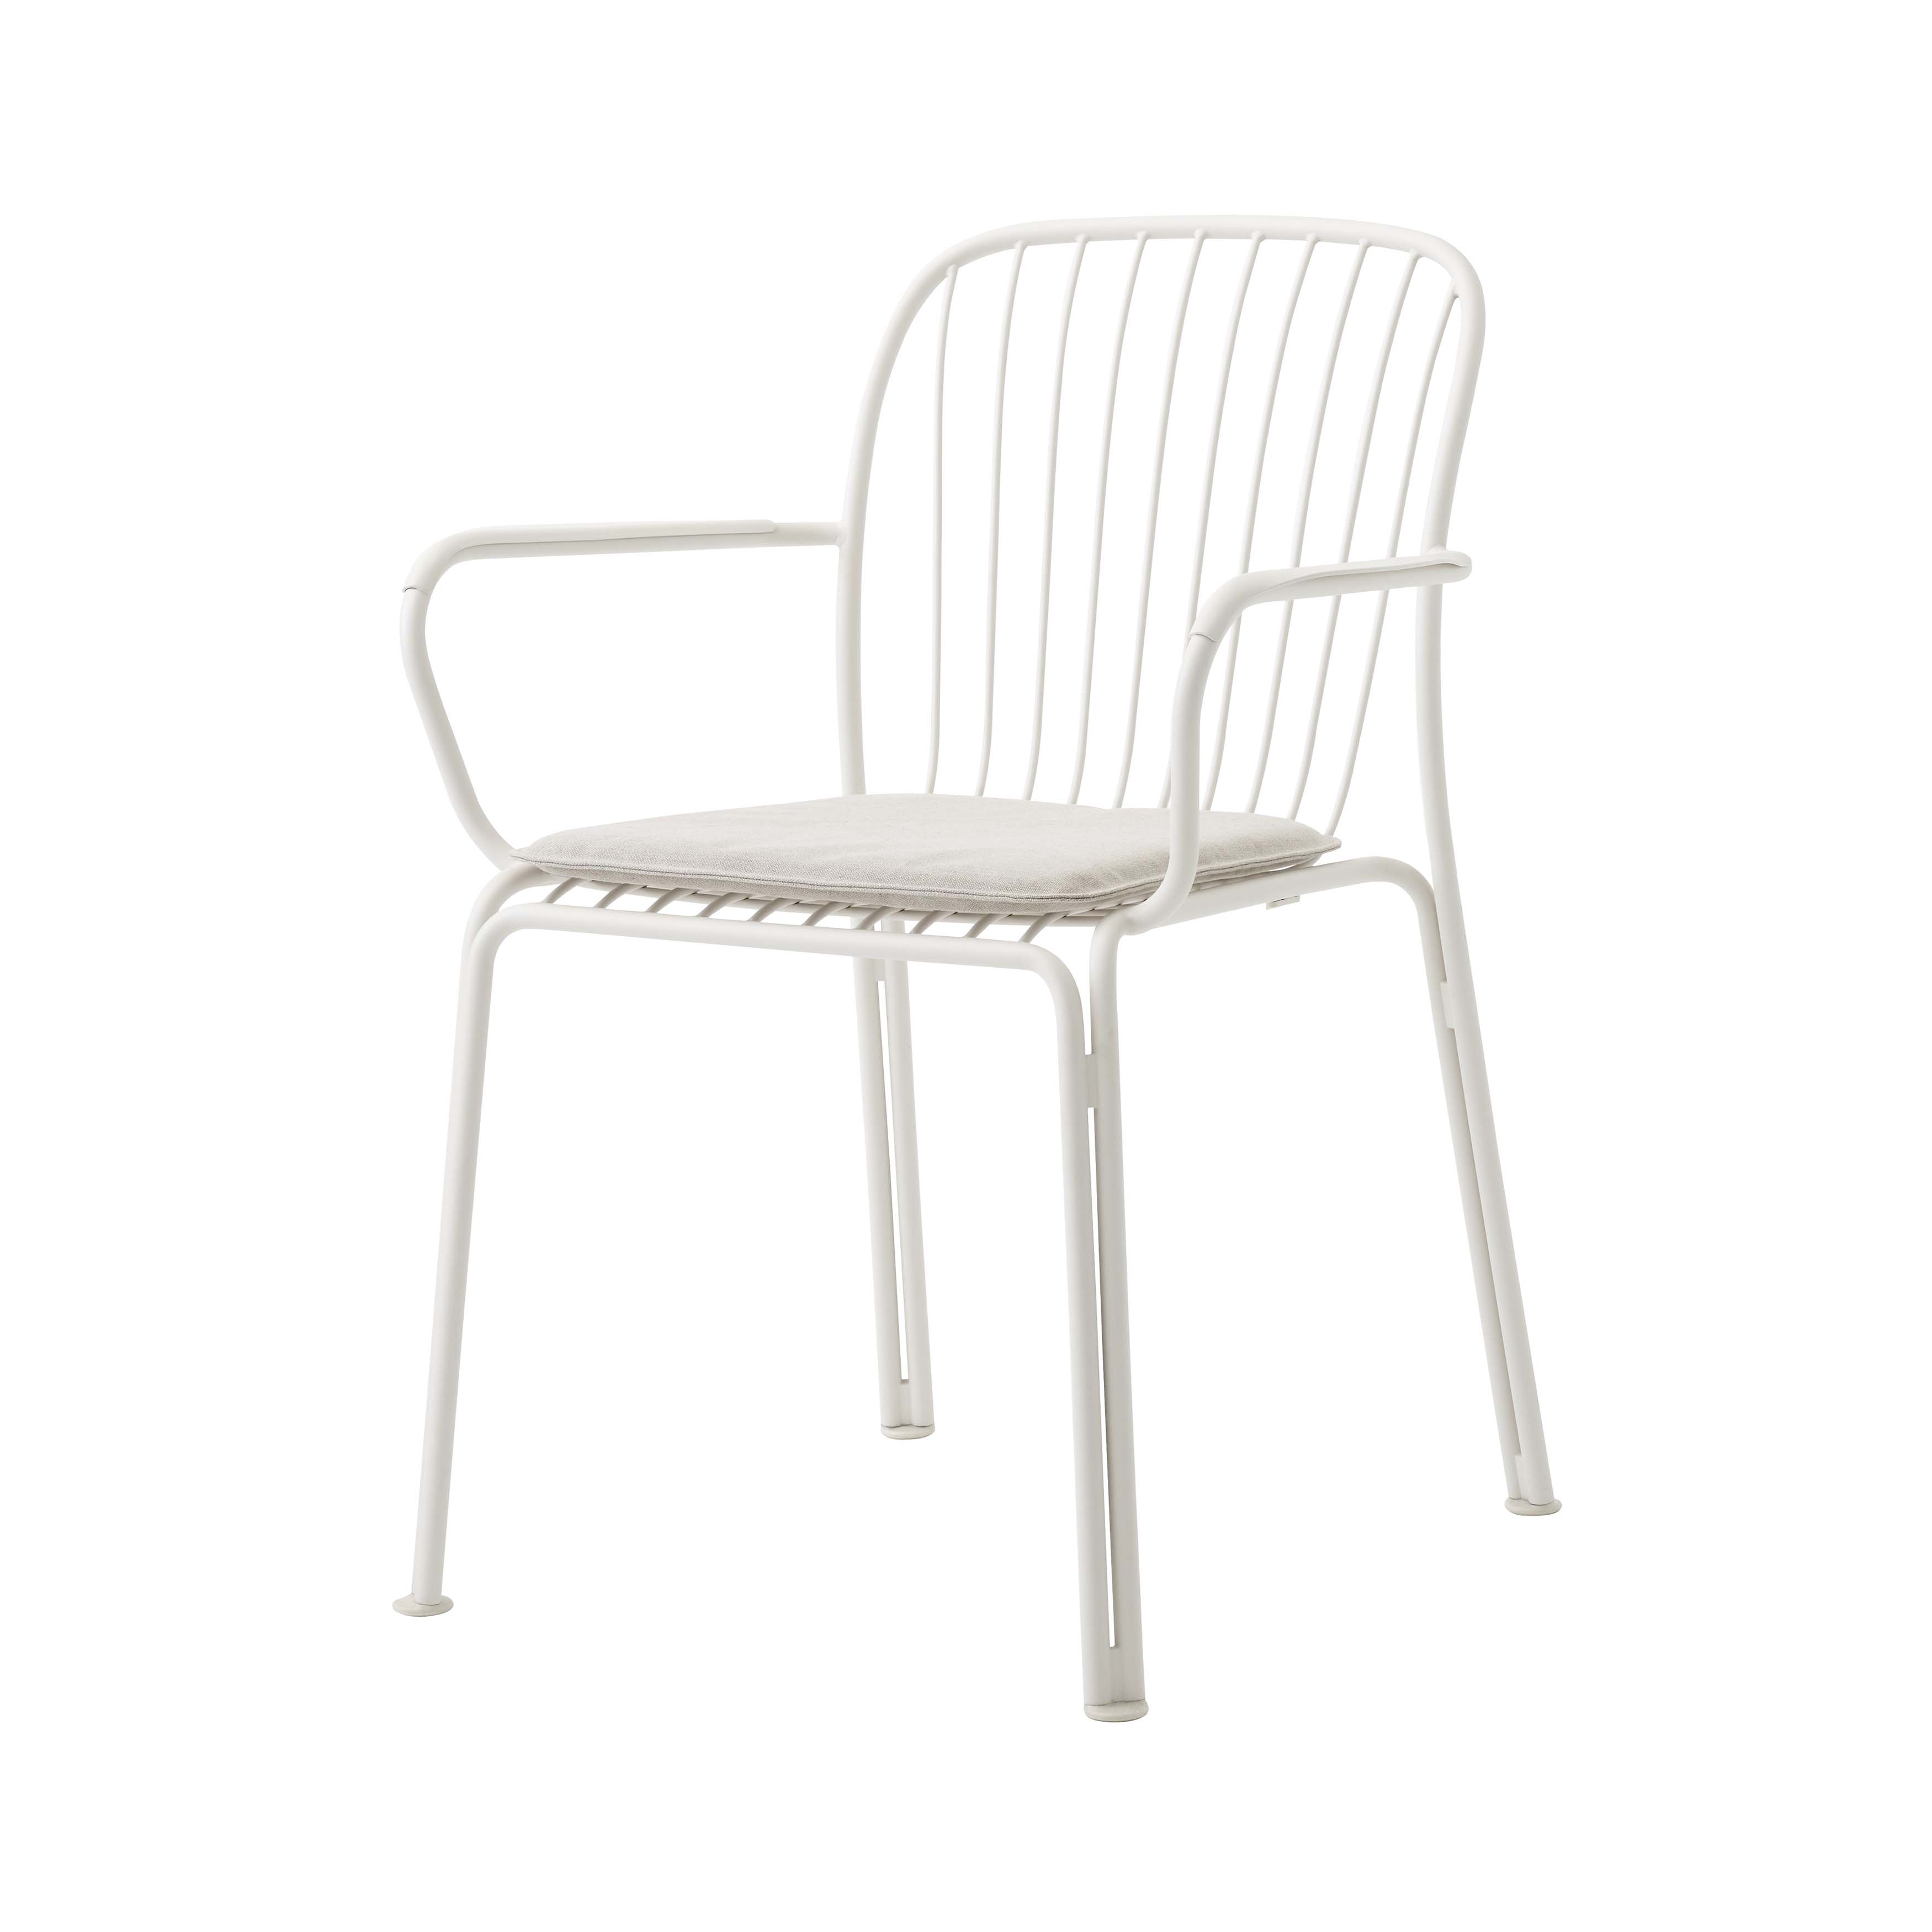 Thorvald SC95 Armchair with Seatpad: Outdoor + Ivory + Heritage Papyrus 